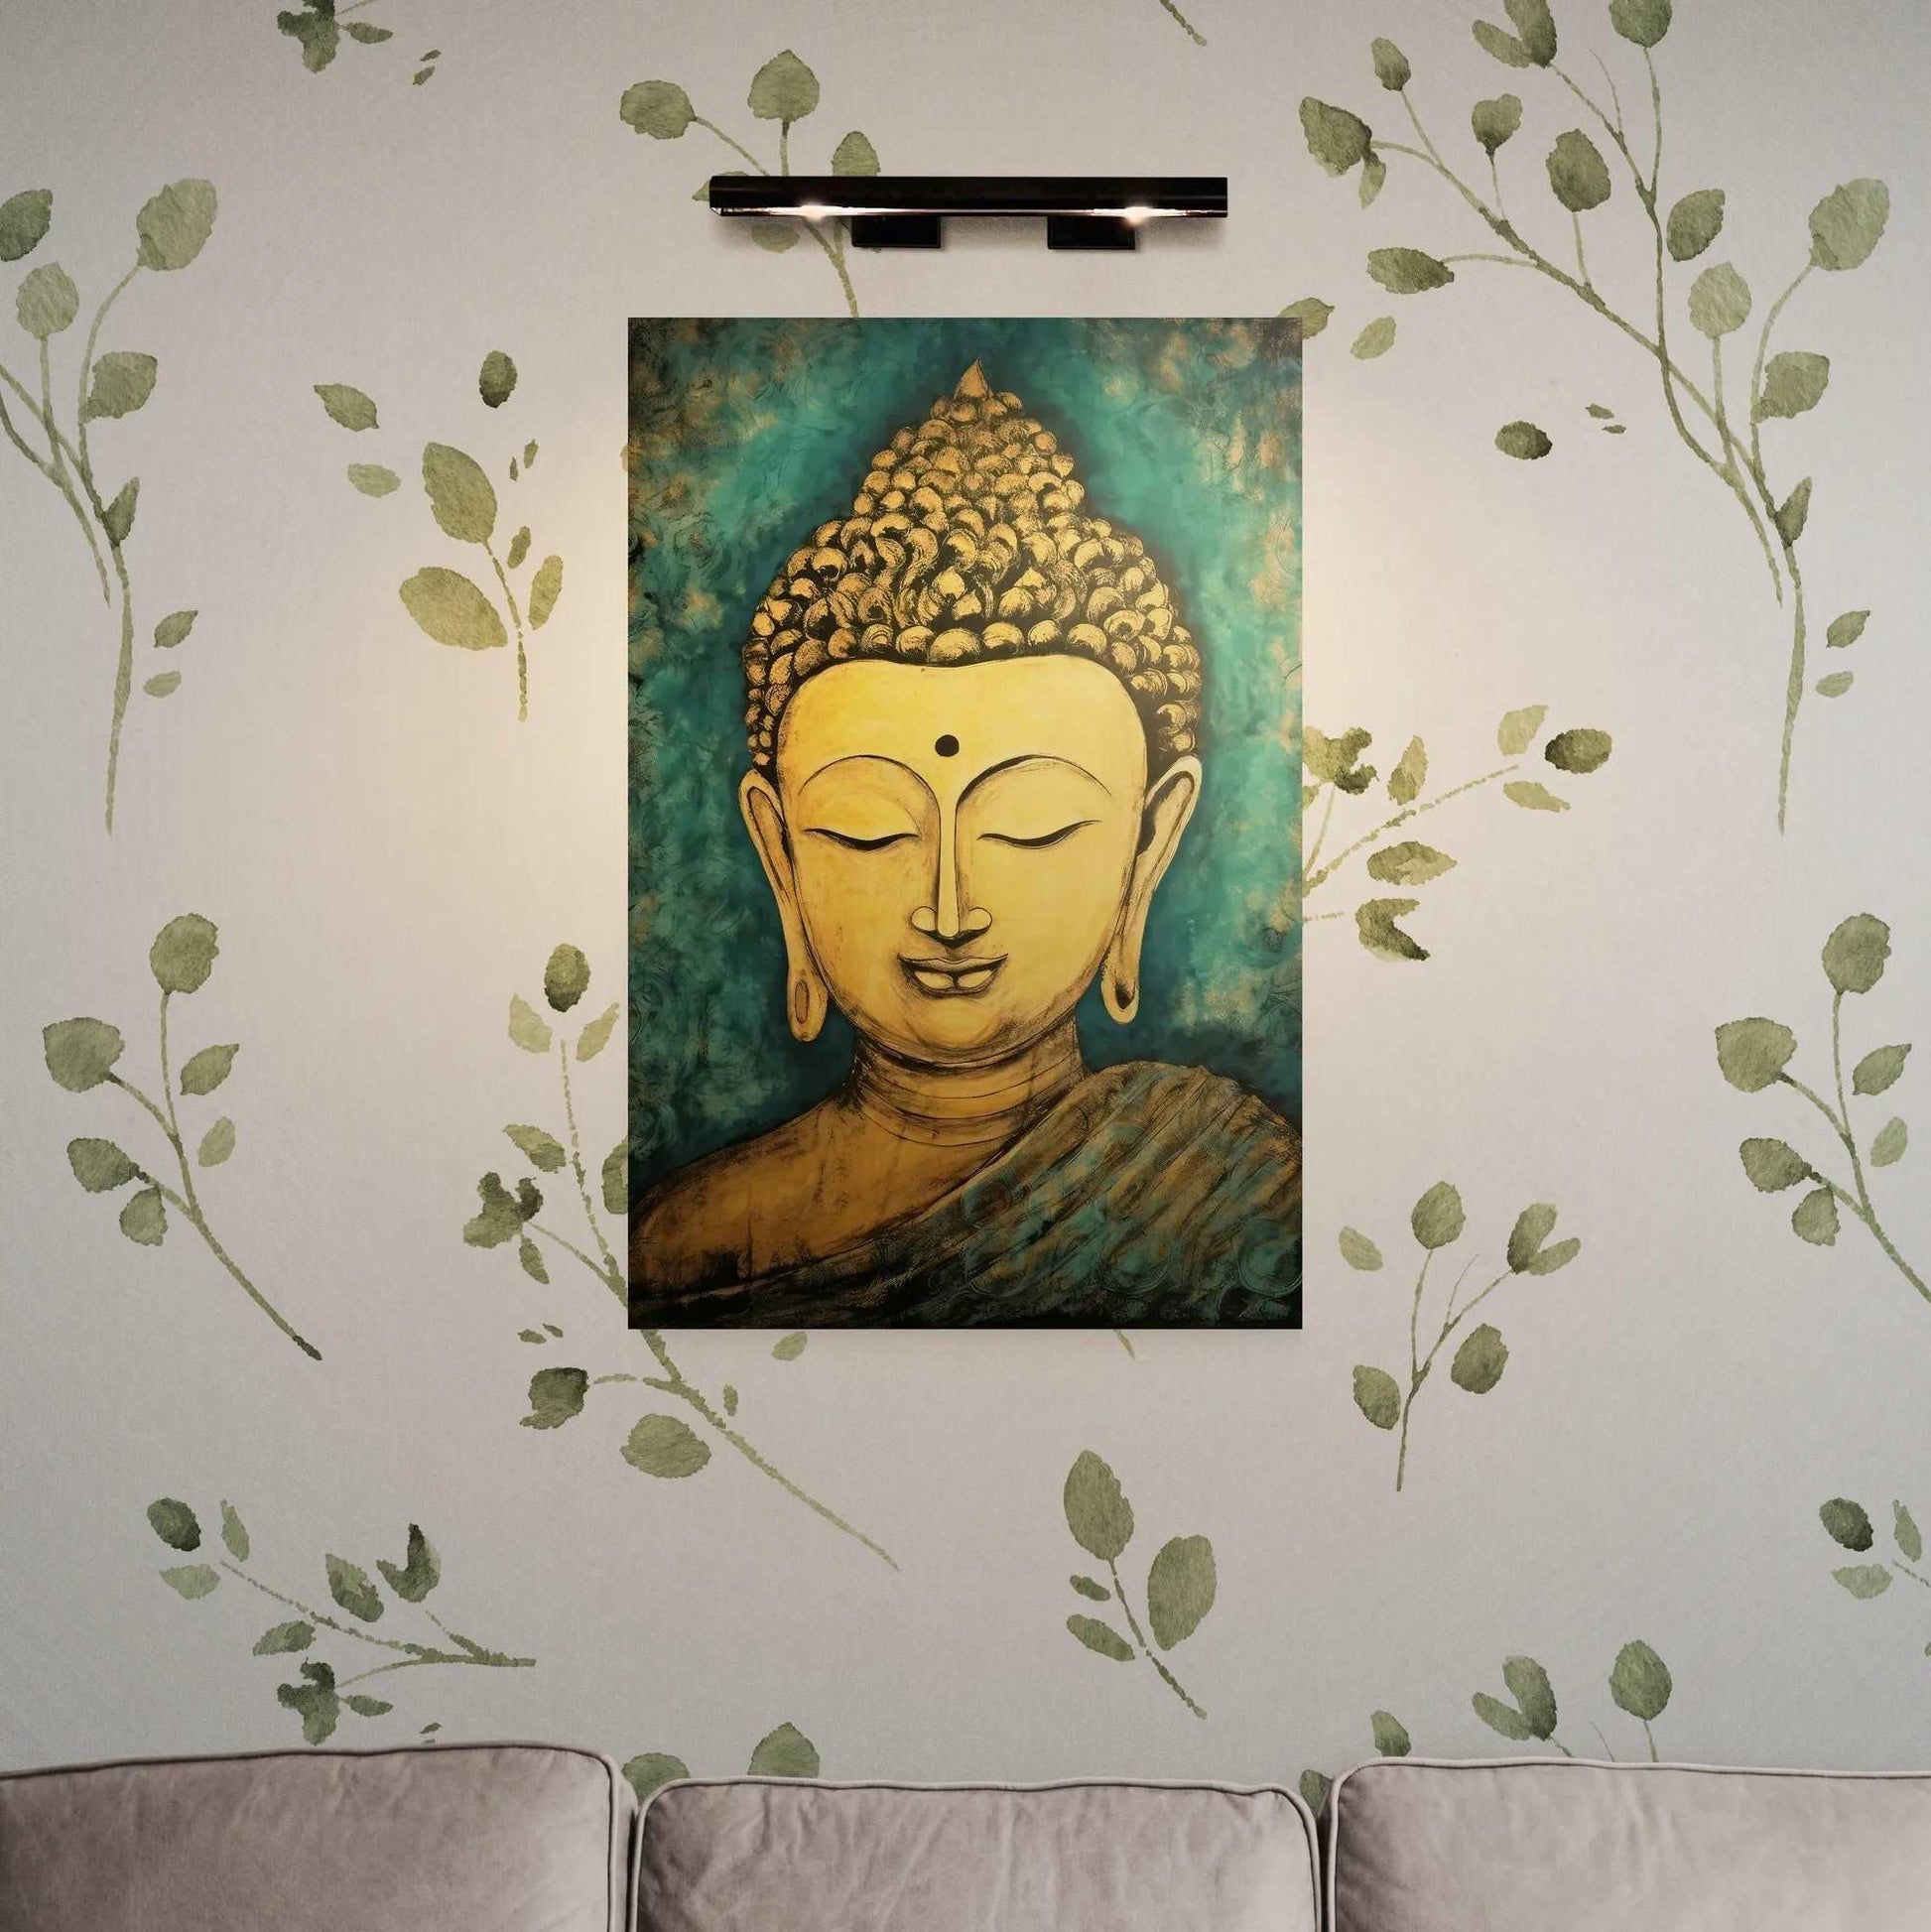 Golden Buddha painting positioned above a simple couch, flanked by delicate green leaf patterns on a white wall, providing a natural, peaceful ambiance.